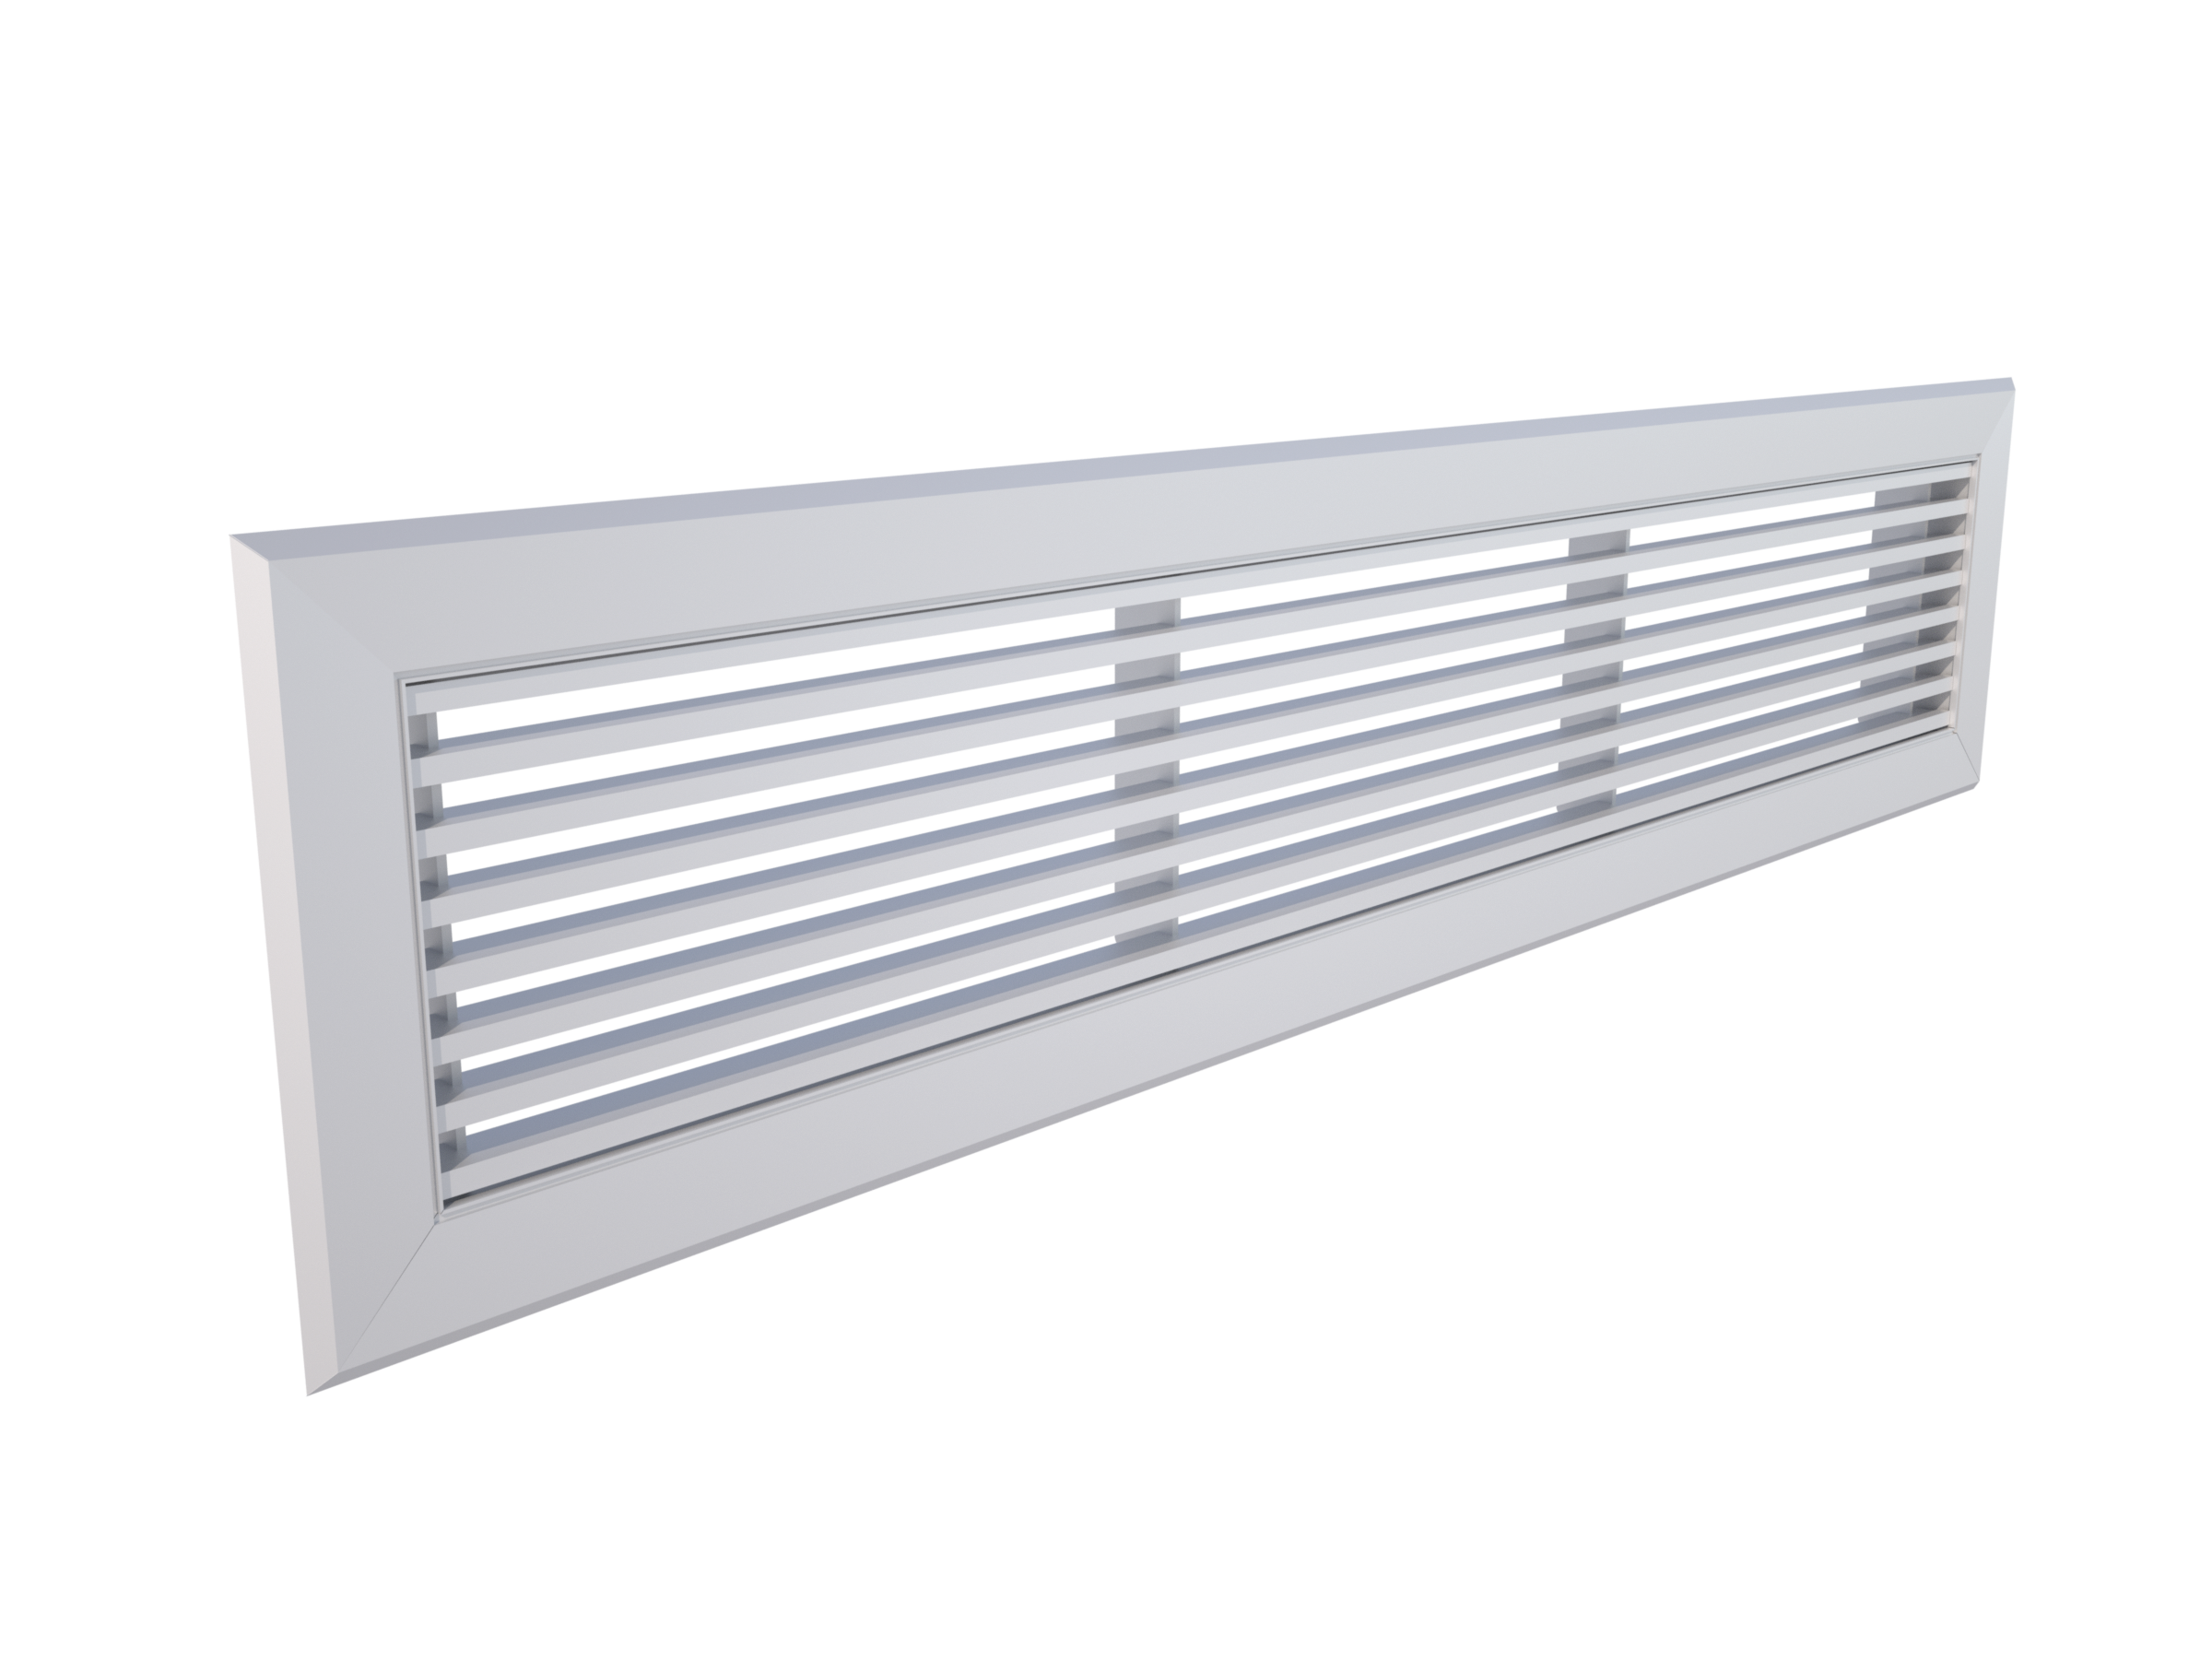 Holyoake LDH-1200 Linear Bar Grille with 0-degree air discharge and 12mm blade spacing